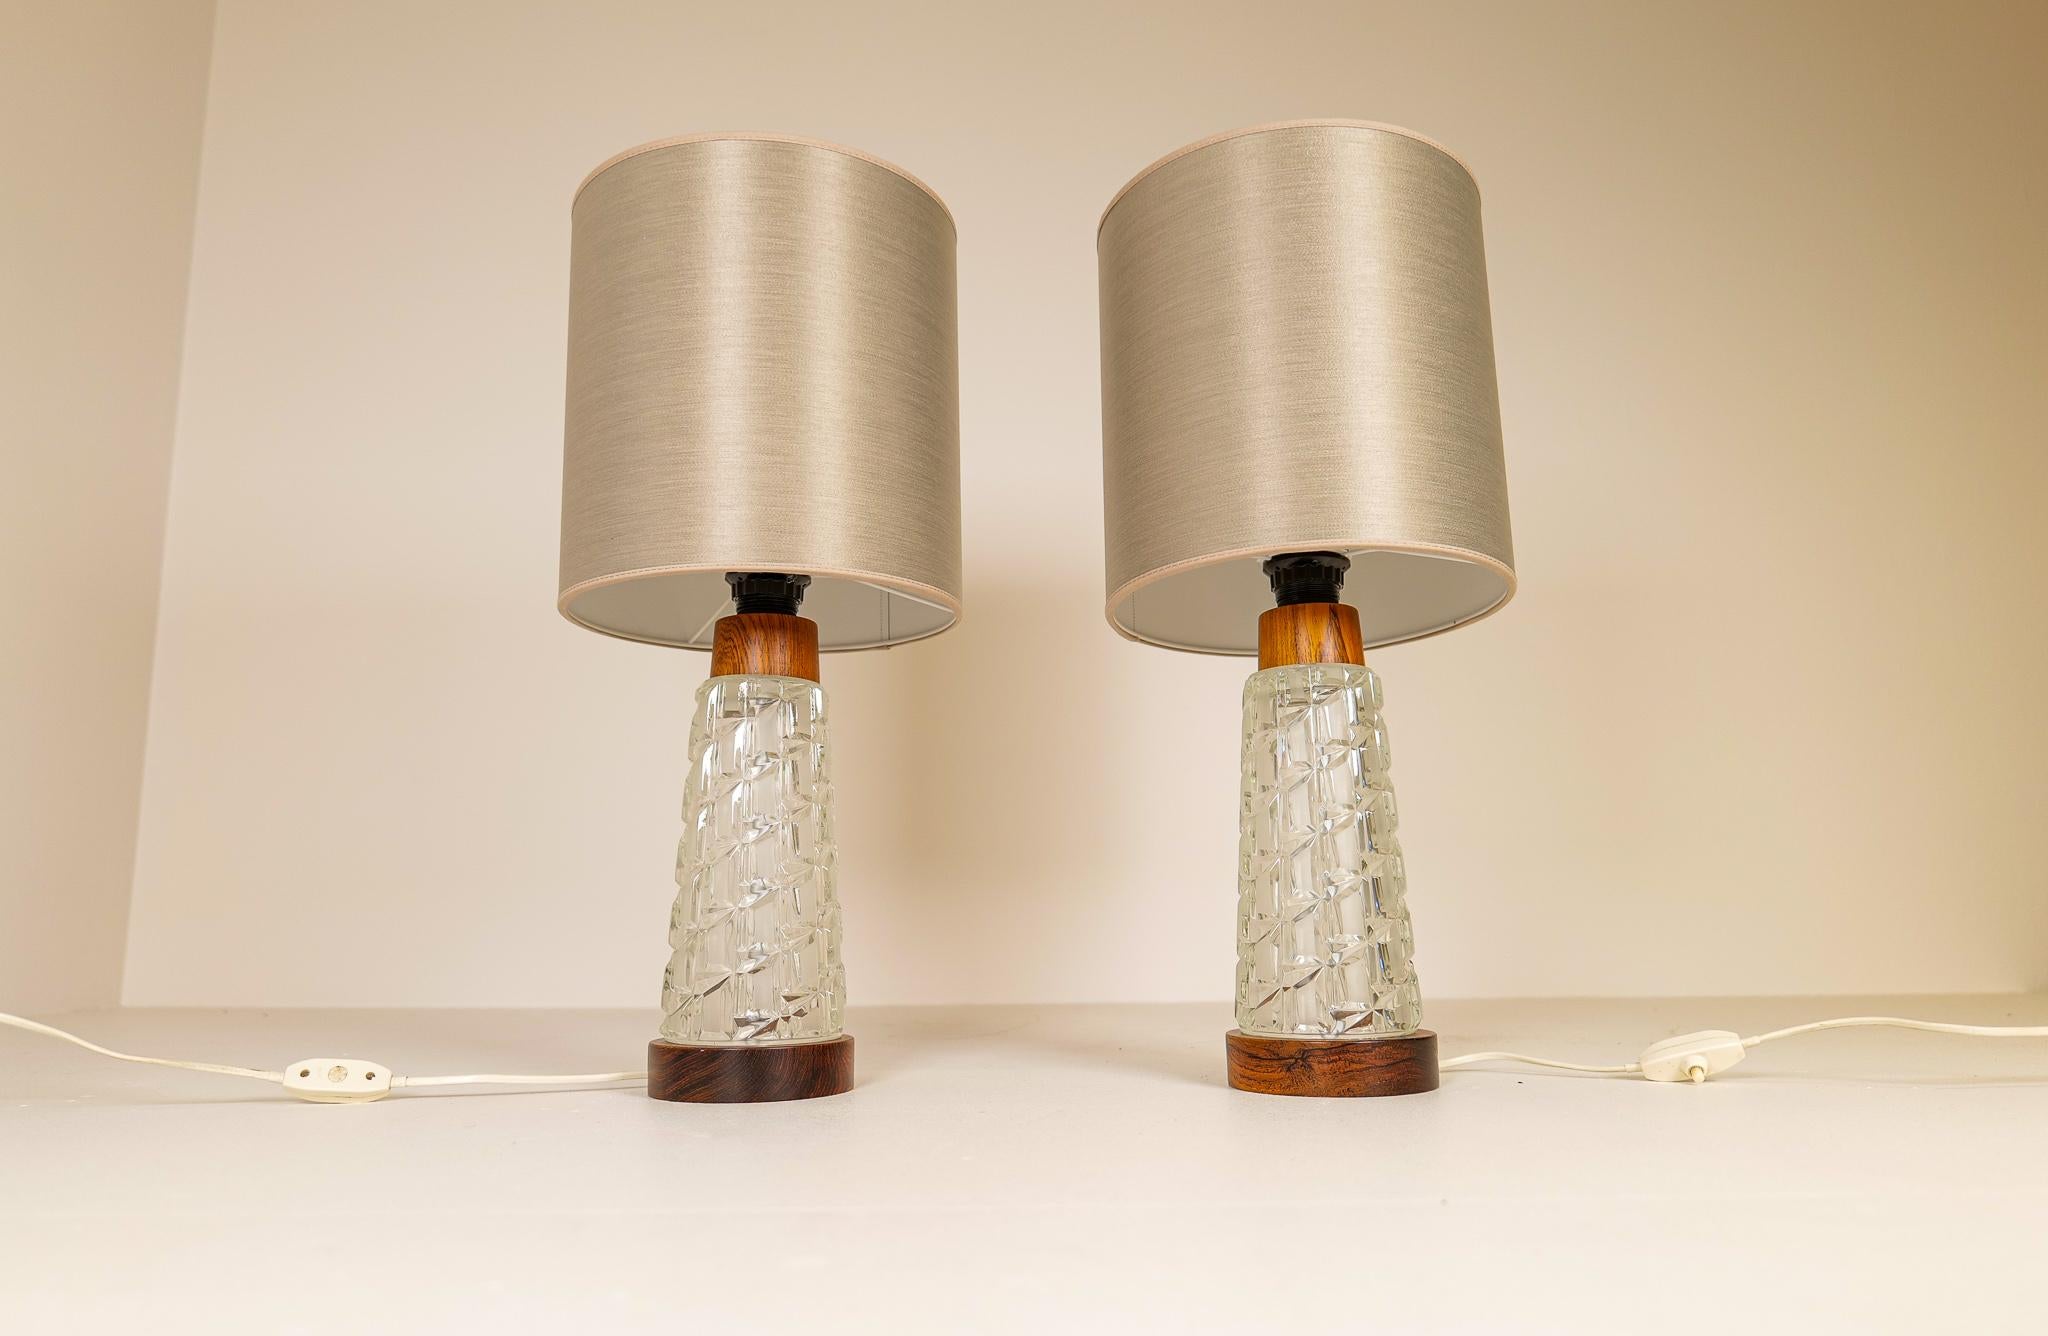 Swedish Midcentury Table Lamps Orrefors Teak and Glass Sweden For Sale